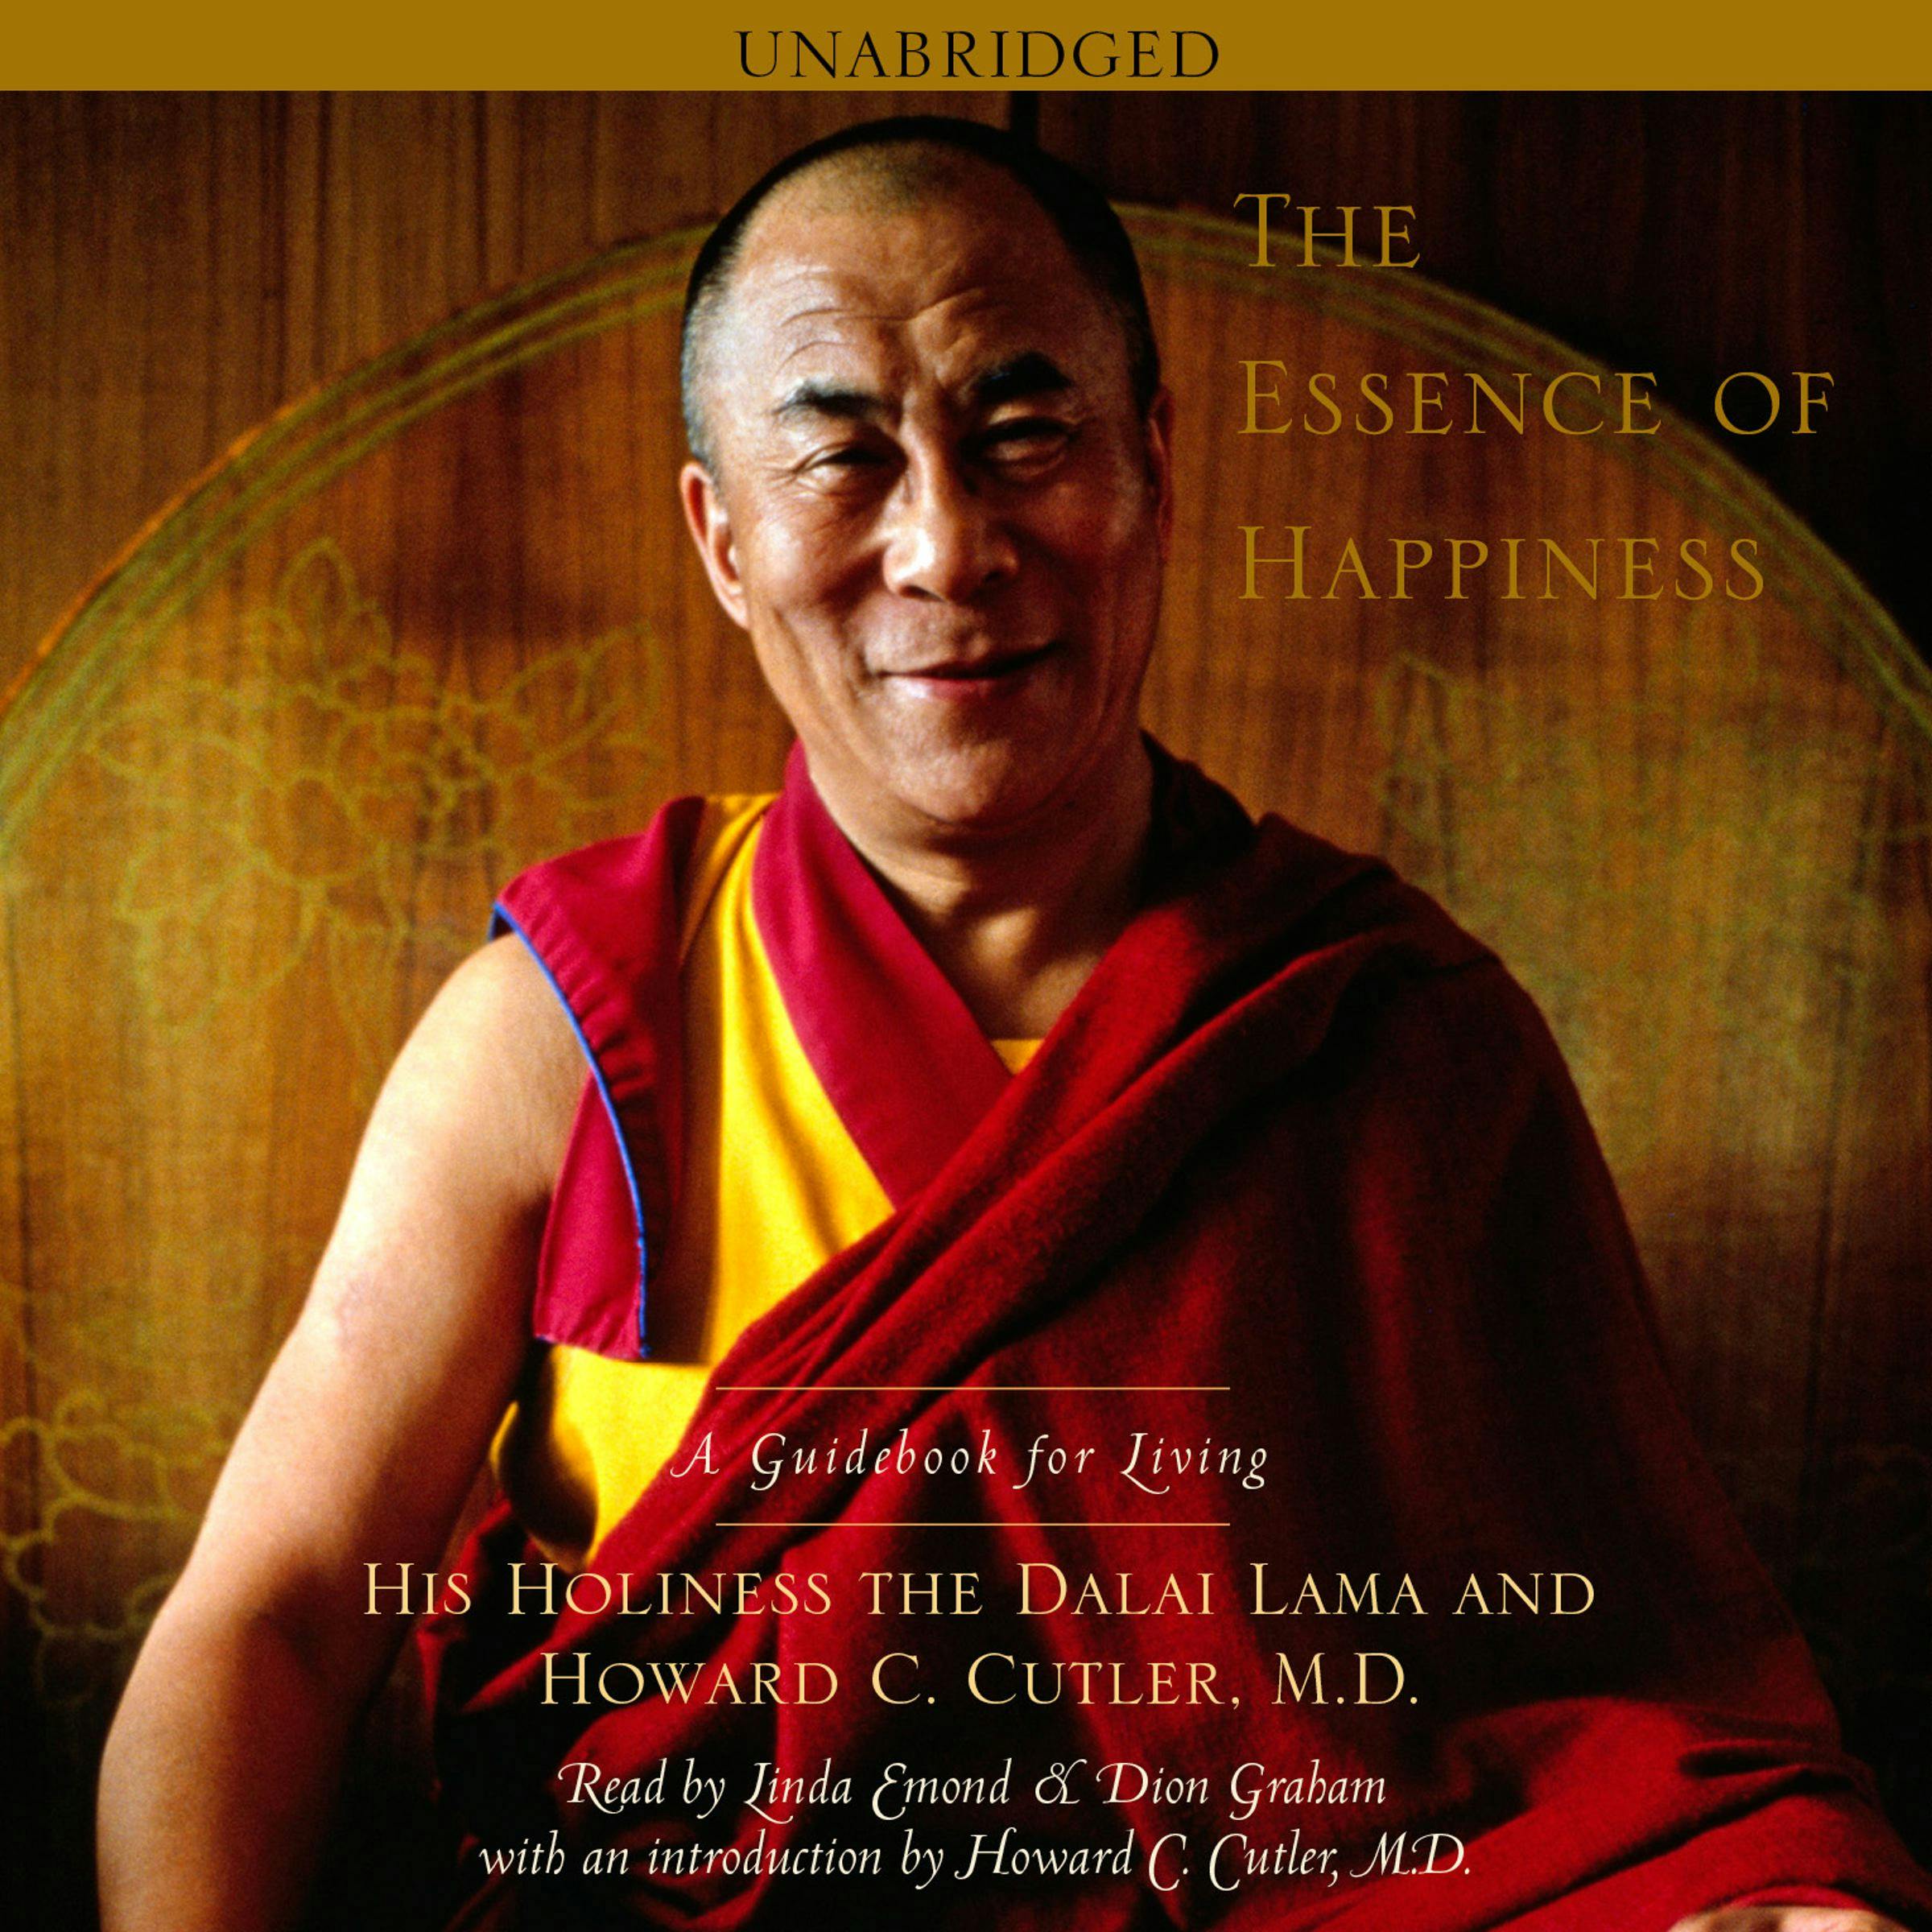 The Essence of Happiness: A Guidebook for Living - His Holiness the Dalai Lama, Howard C. Cutler